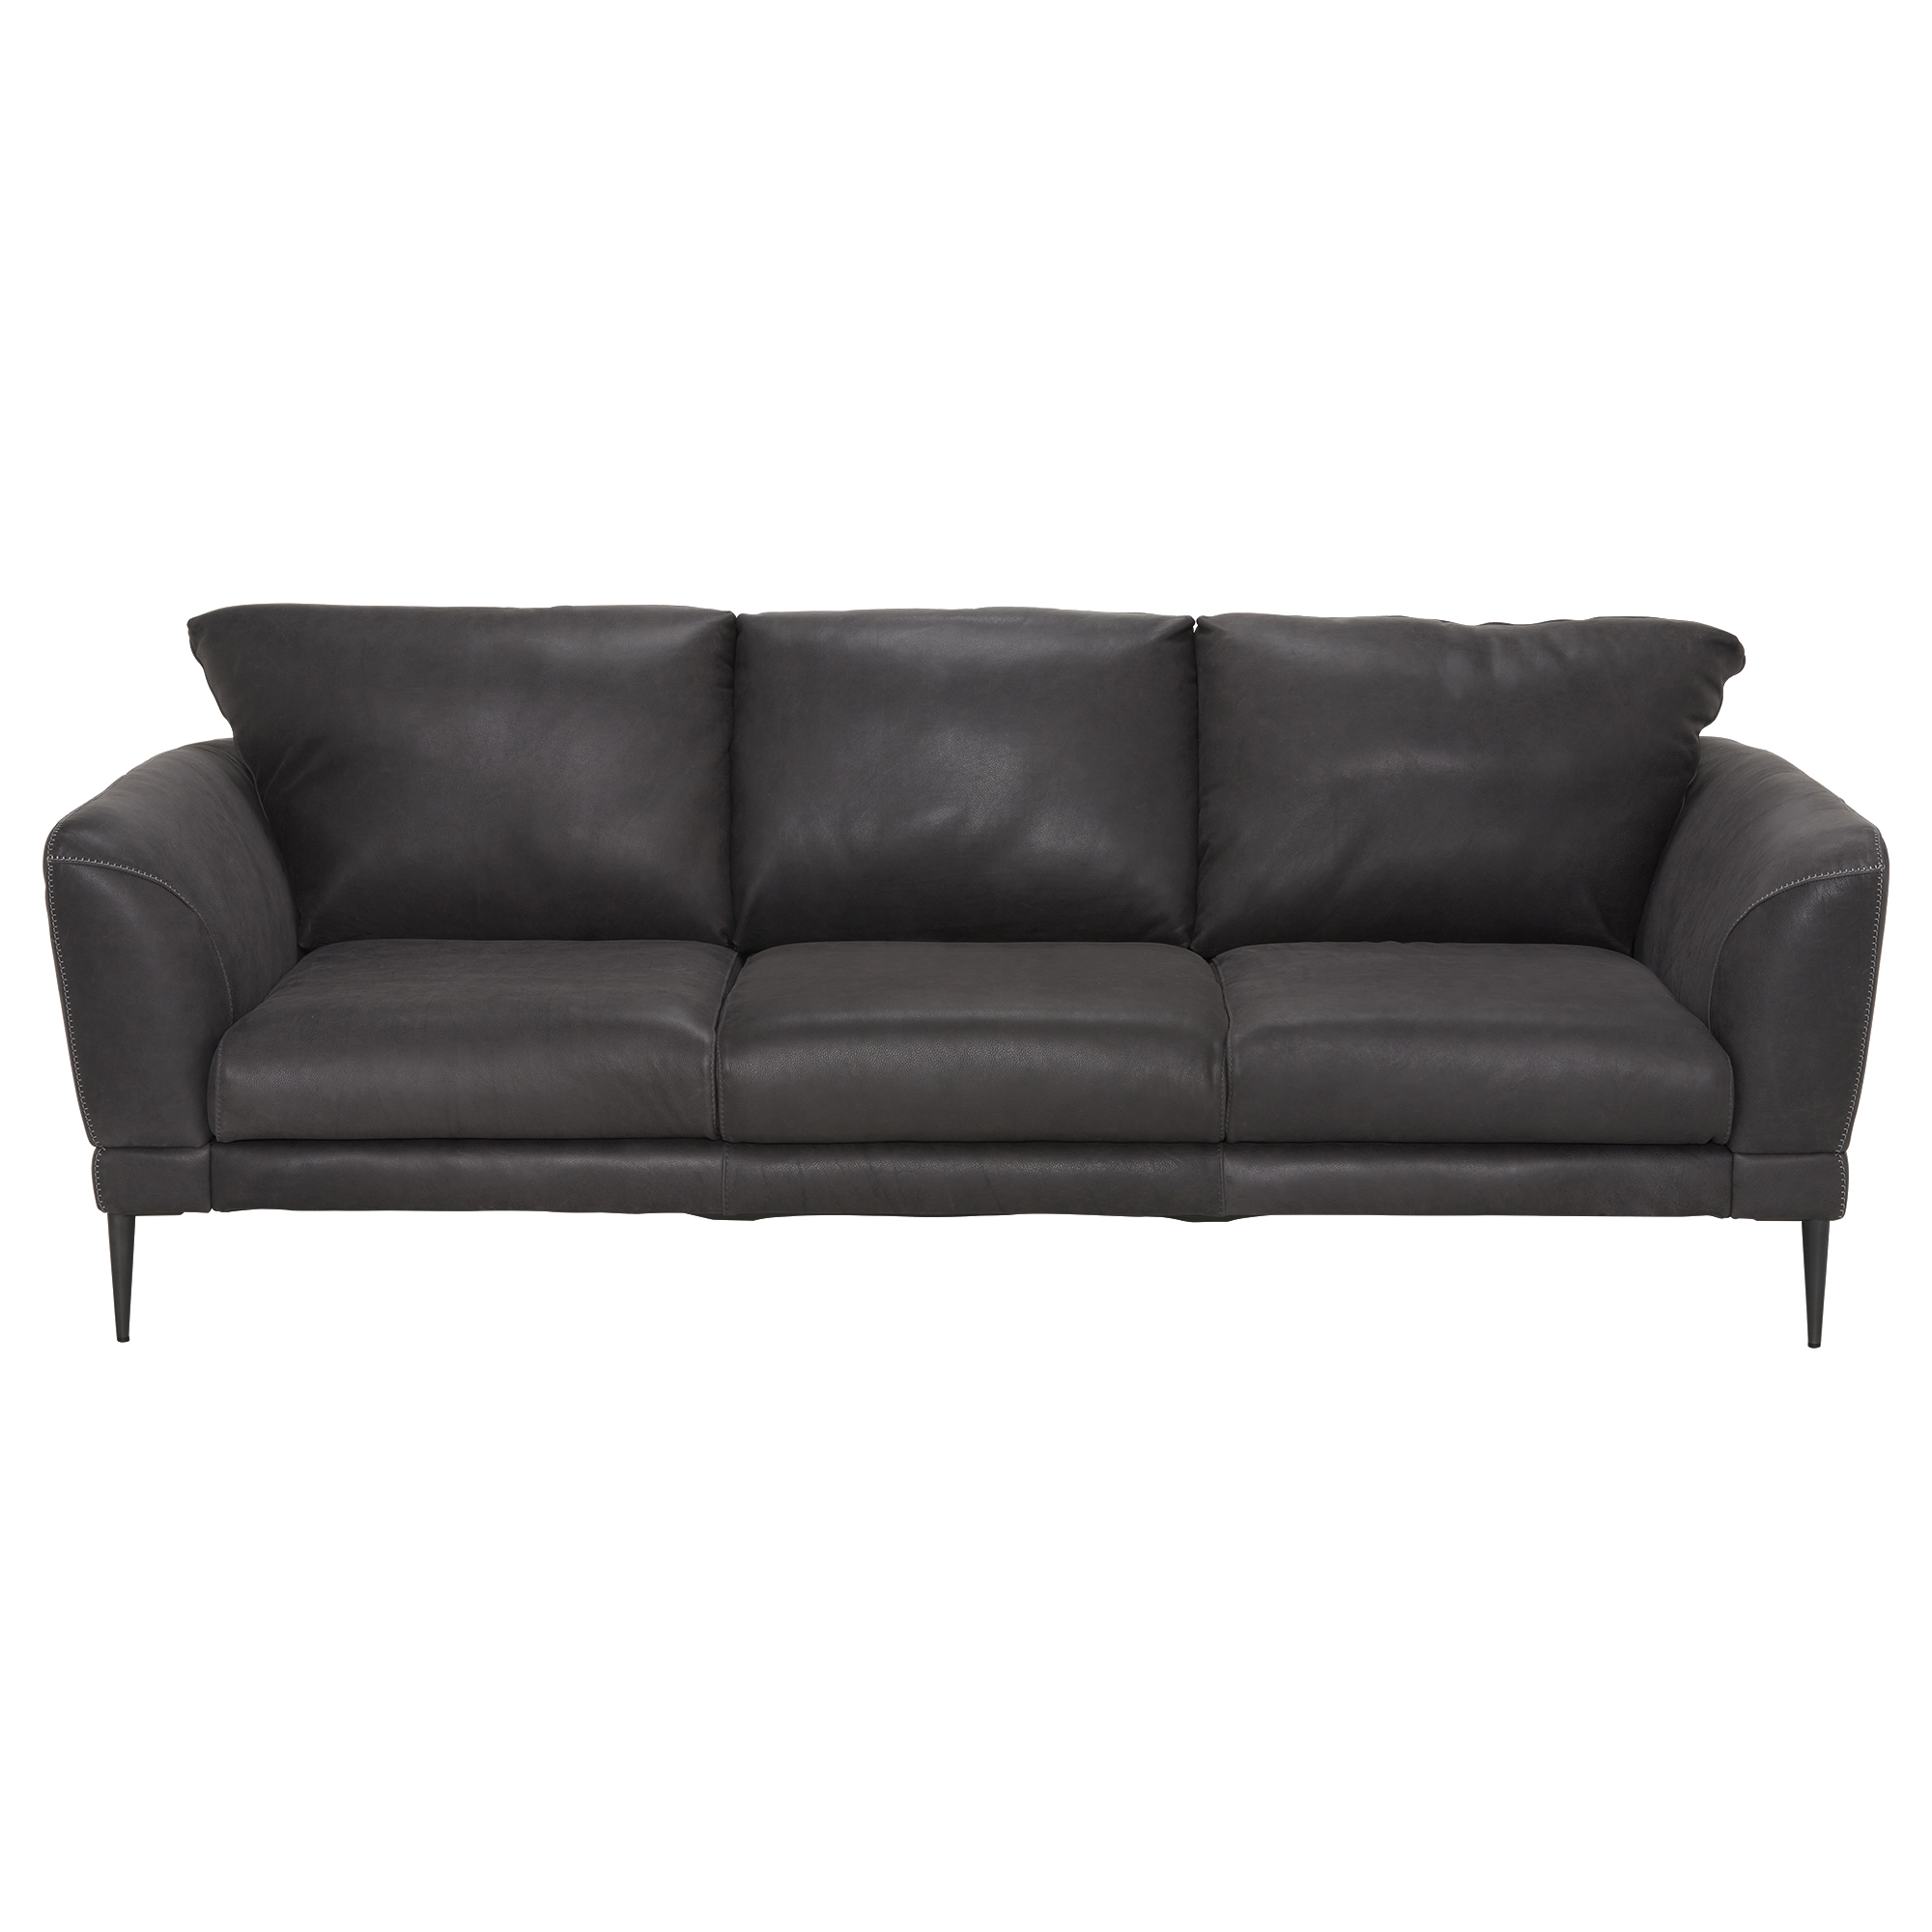 Tennessee 3 Seater Sofa, Grey Leather | Barker & Stonehouse